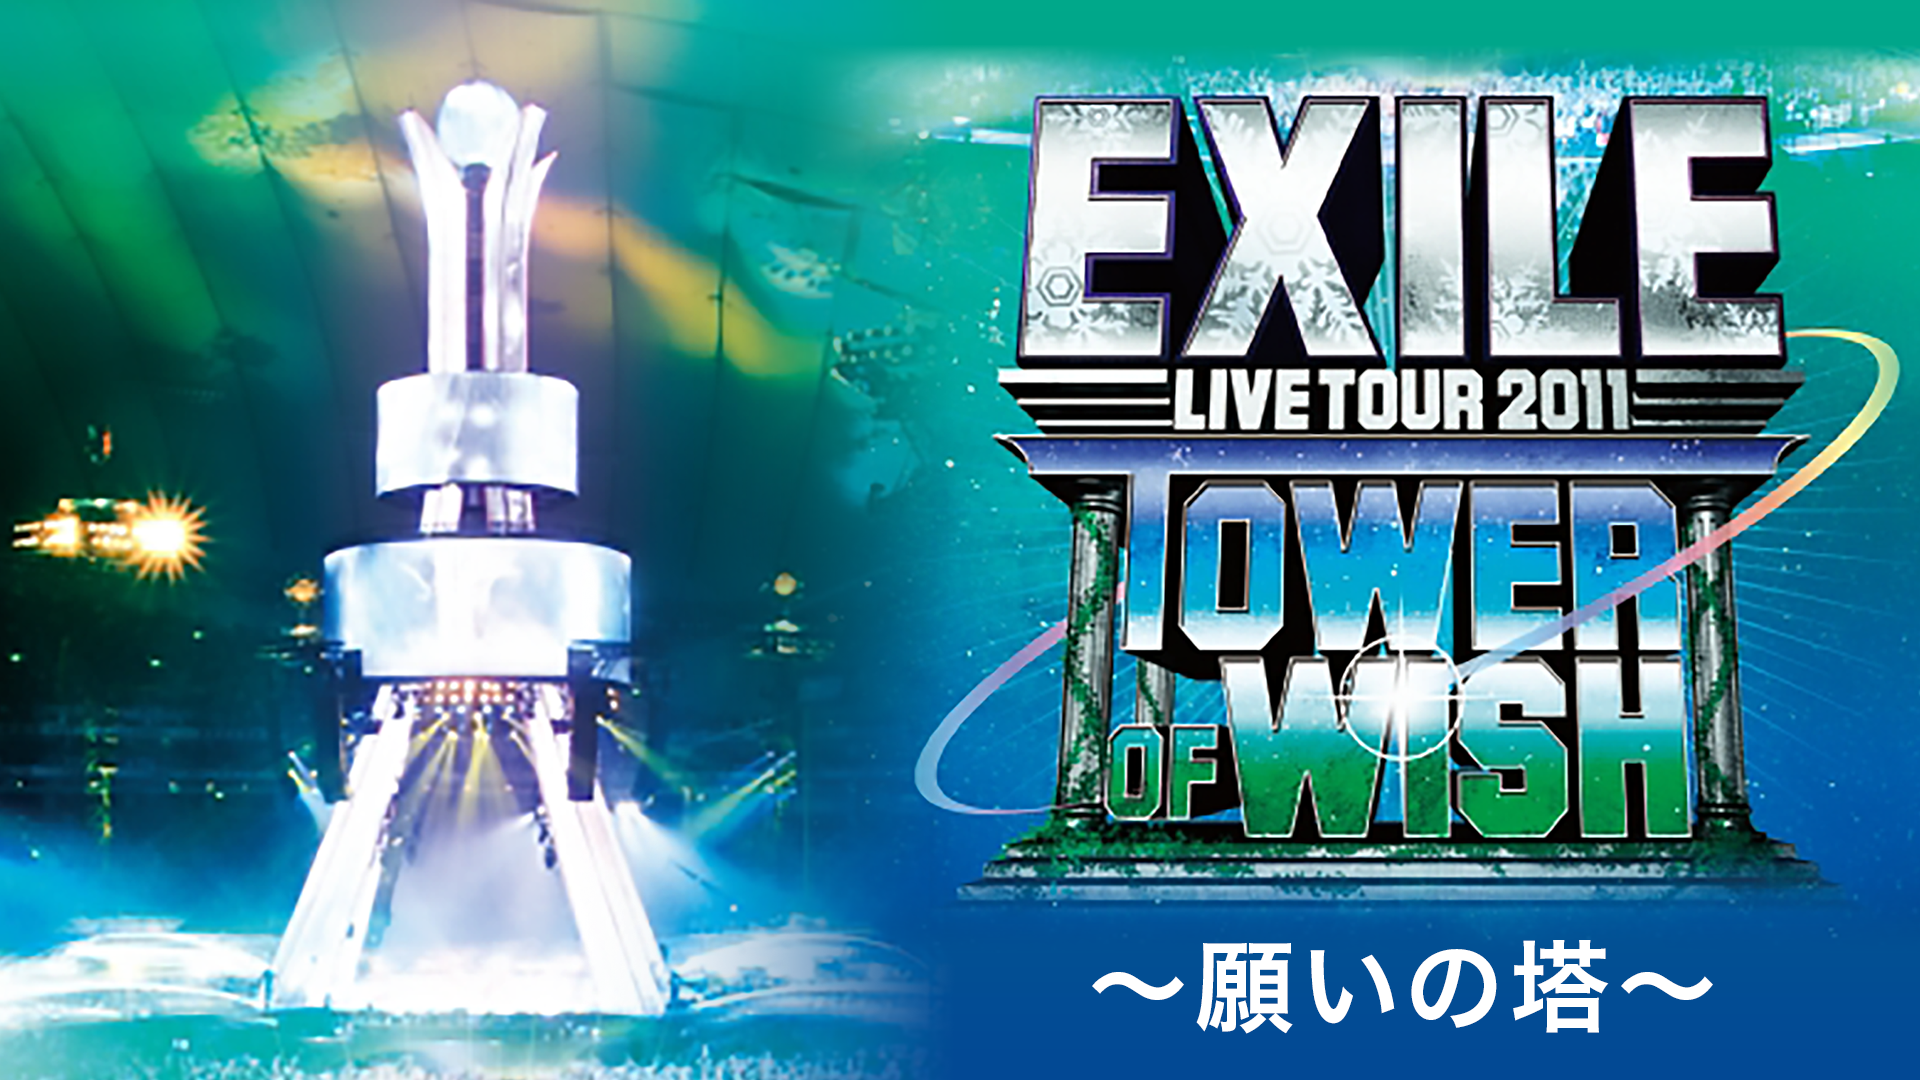 EXILE EXILE LIVE TOUR 2011 TOWER OF WIS…